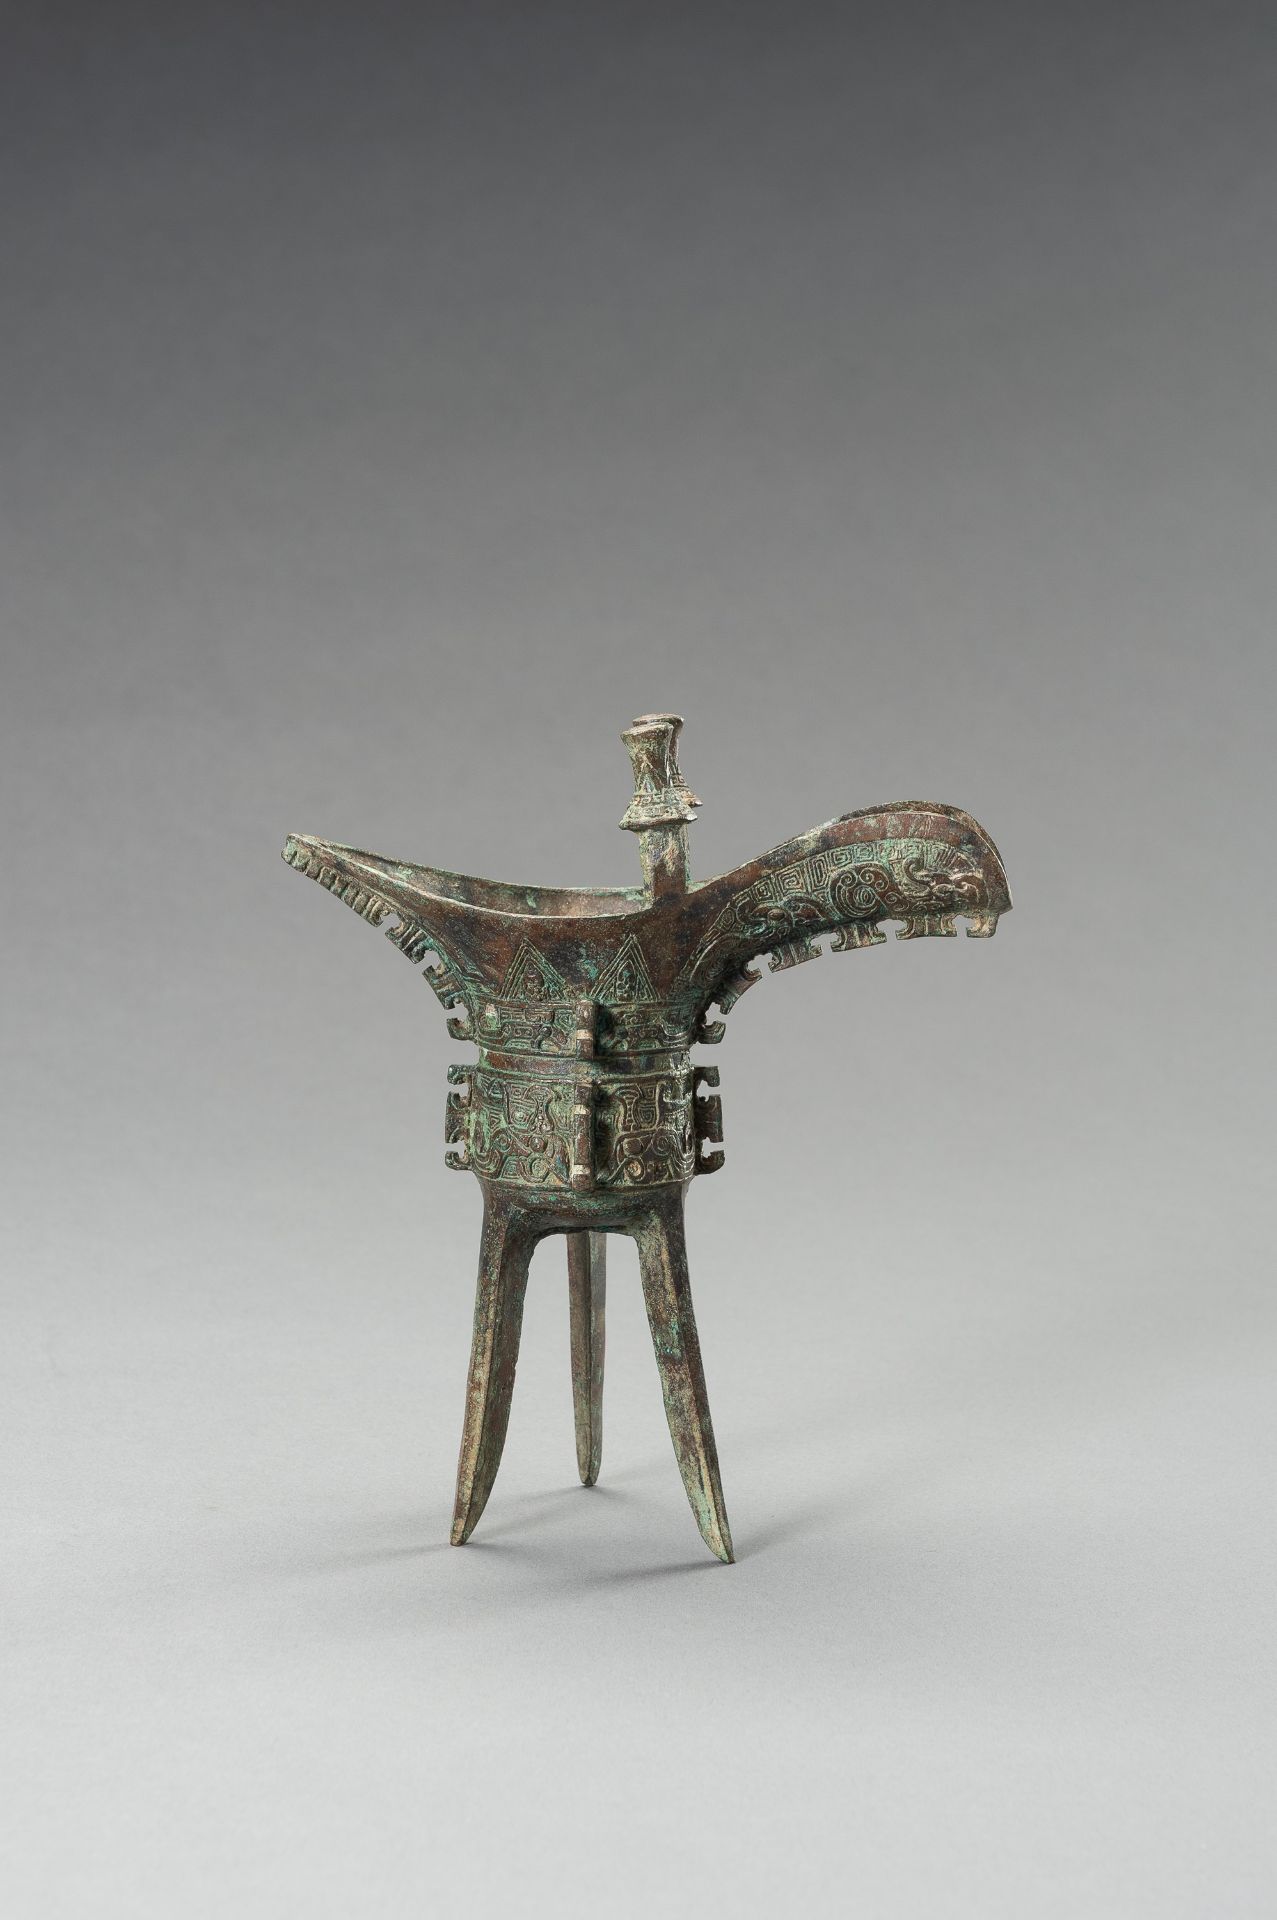 AN ARCHAISTIC SHANG-STYLE BRONZE RITUAL TRIPOD WINE VESSEL, JUE - Image 4 of 9